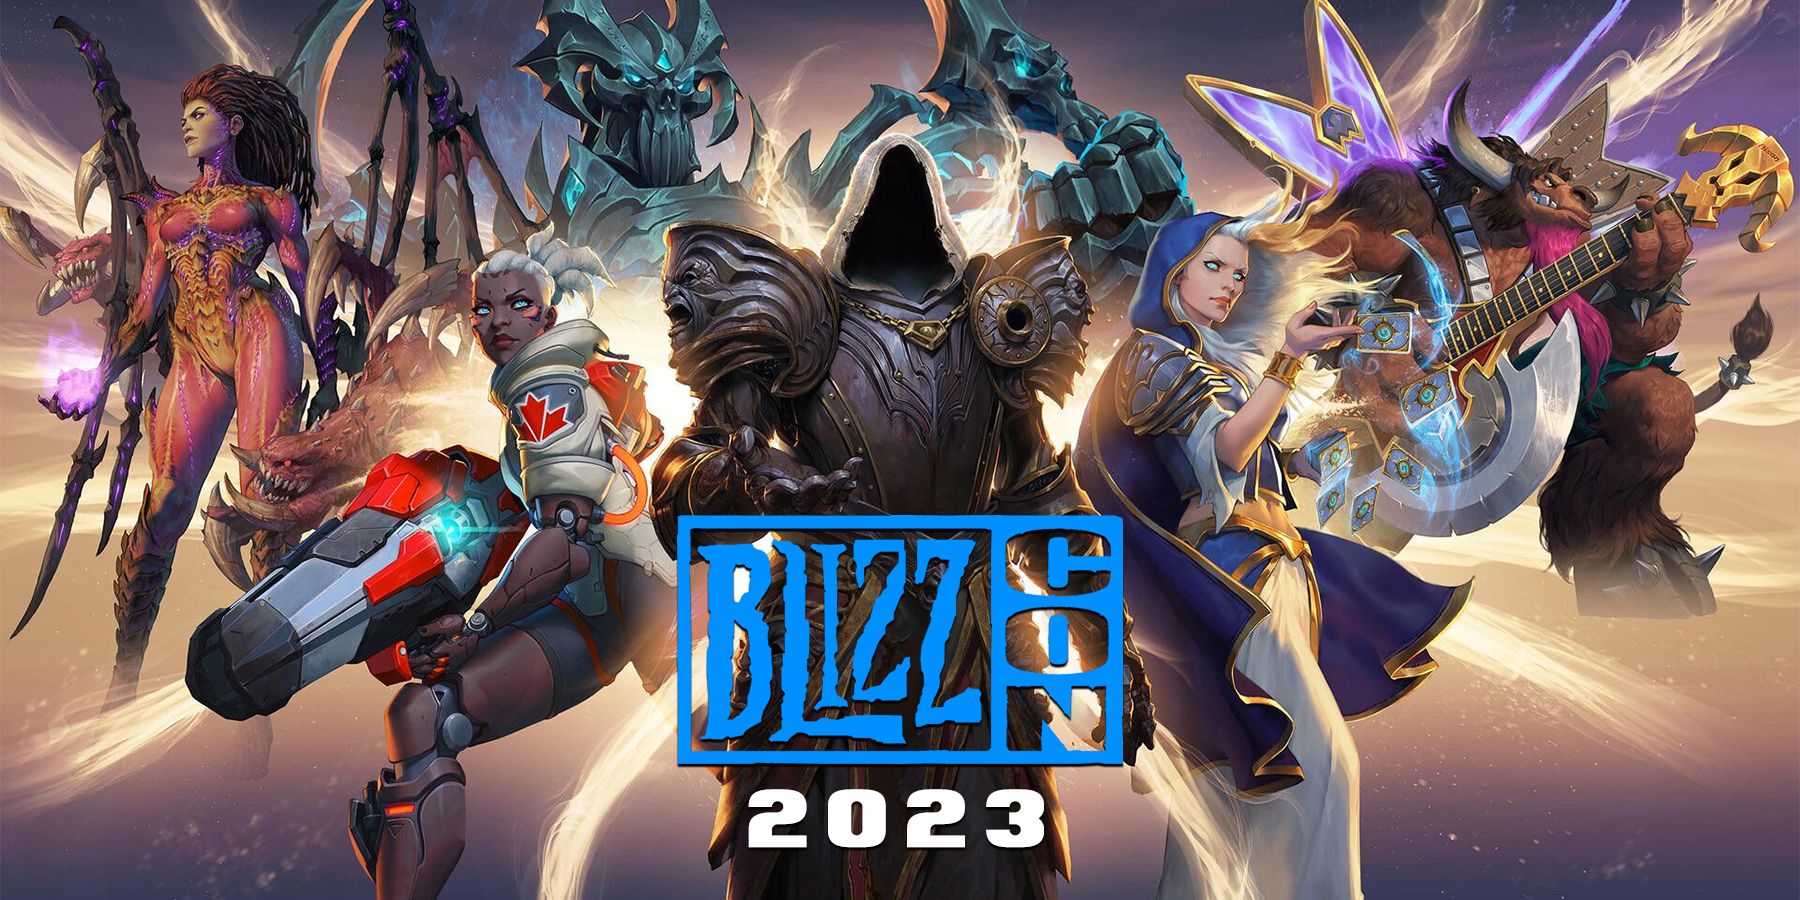 BlizzCon is Coming Back in 2023